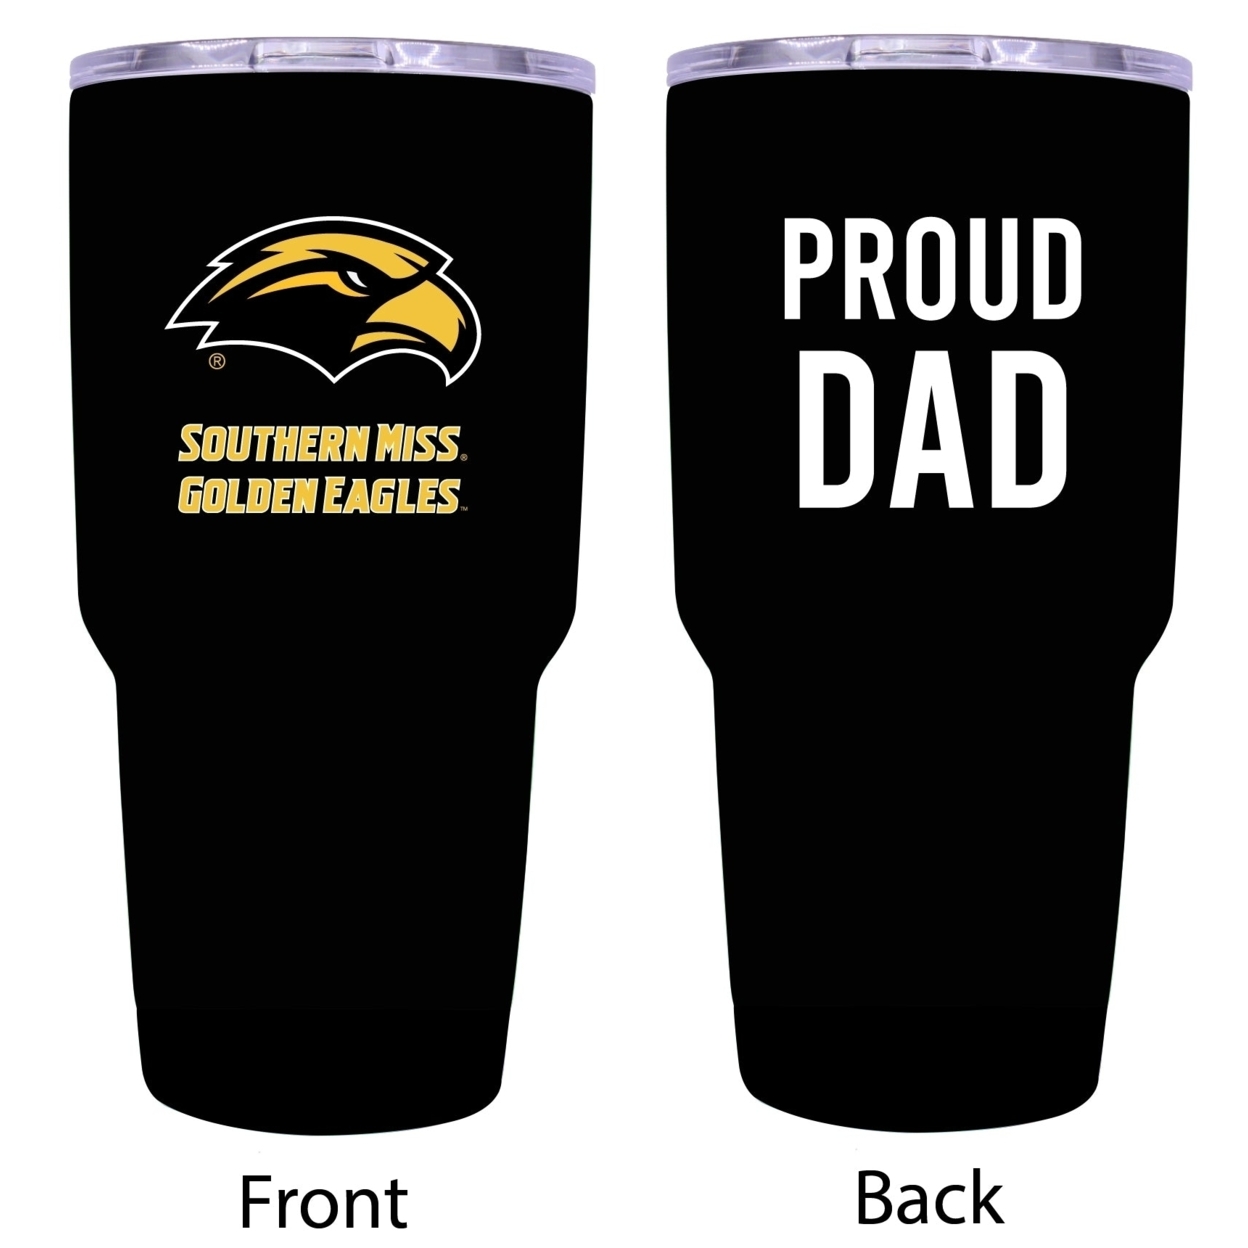 R And R Imports Southern Mississippi Golden Eagles Proud Dad 24 Oz Insulated Stainless Steel Tumblers Black.